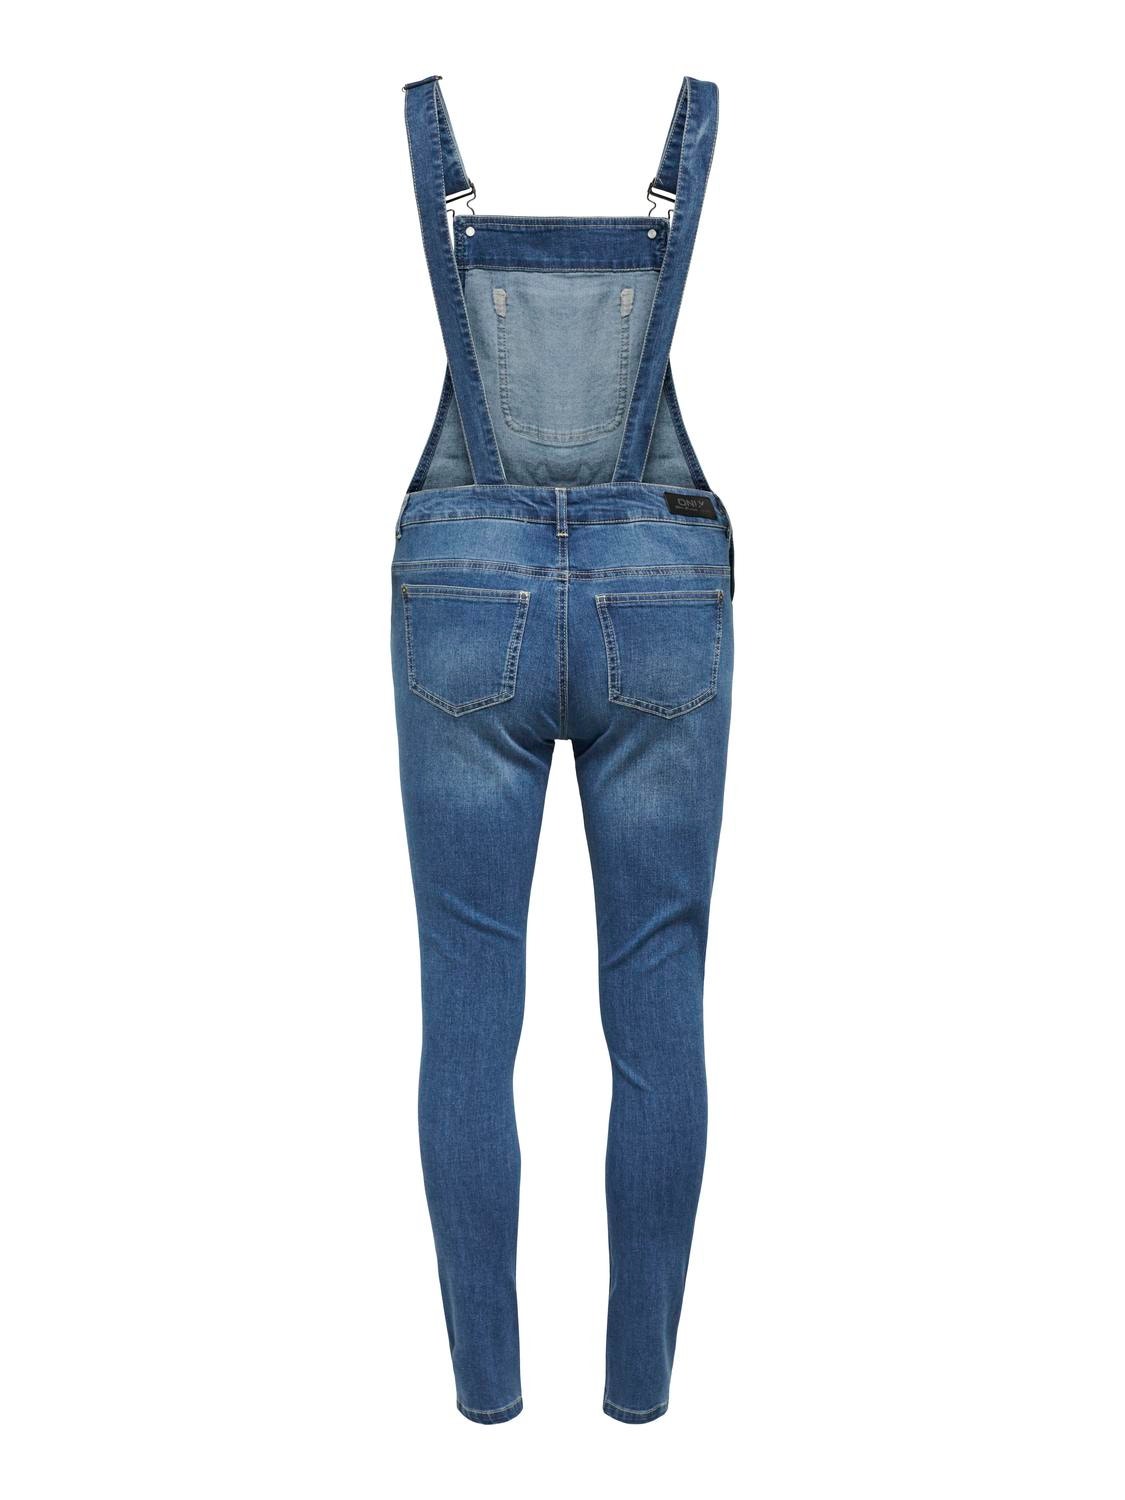 ONLY Loose Fit Jeans Overall -Medium Blue Denim - 15204481